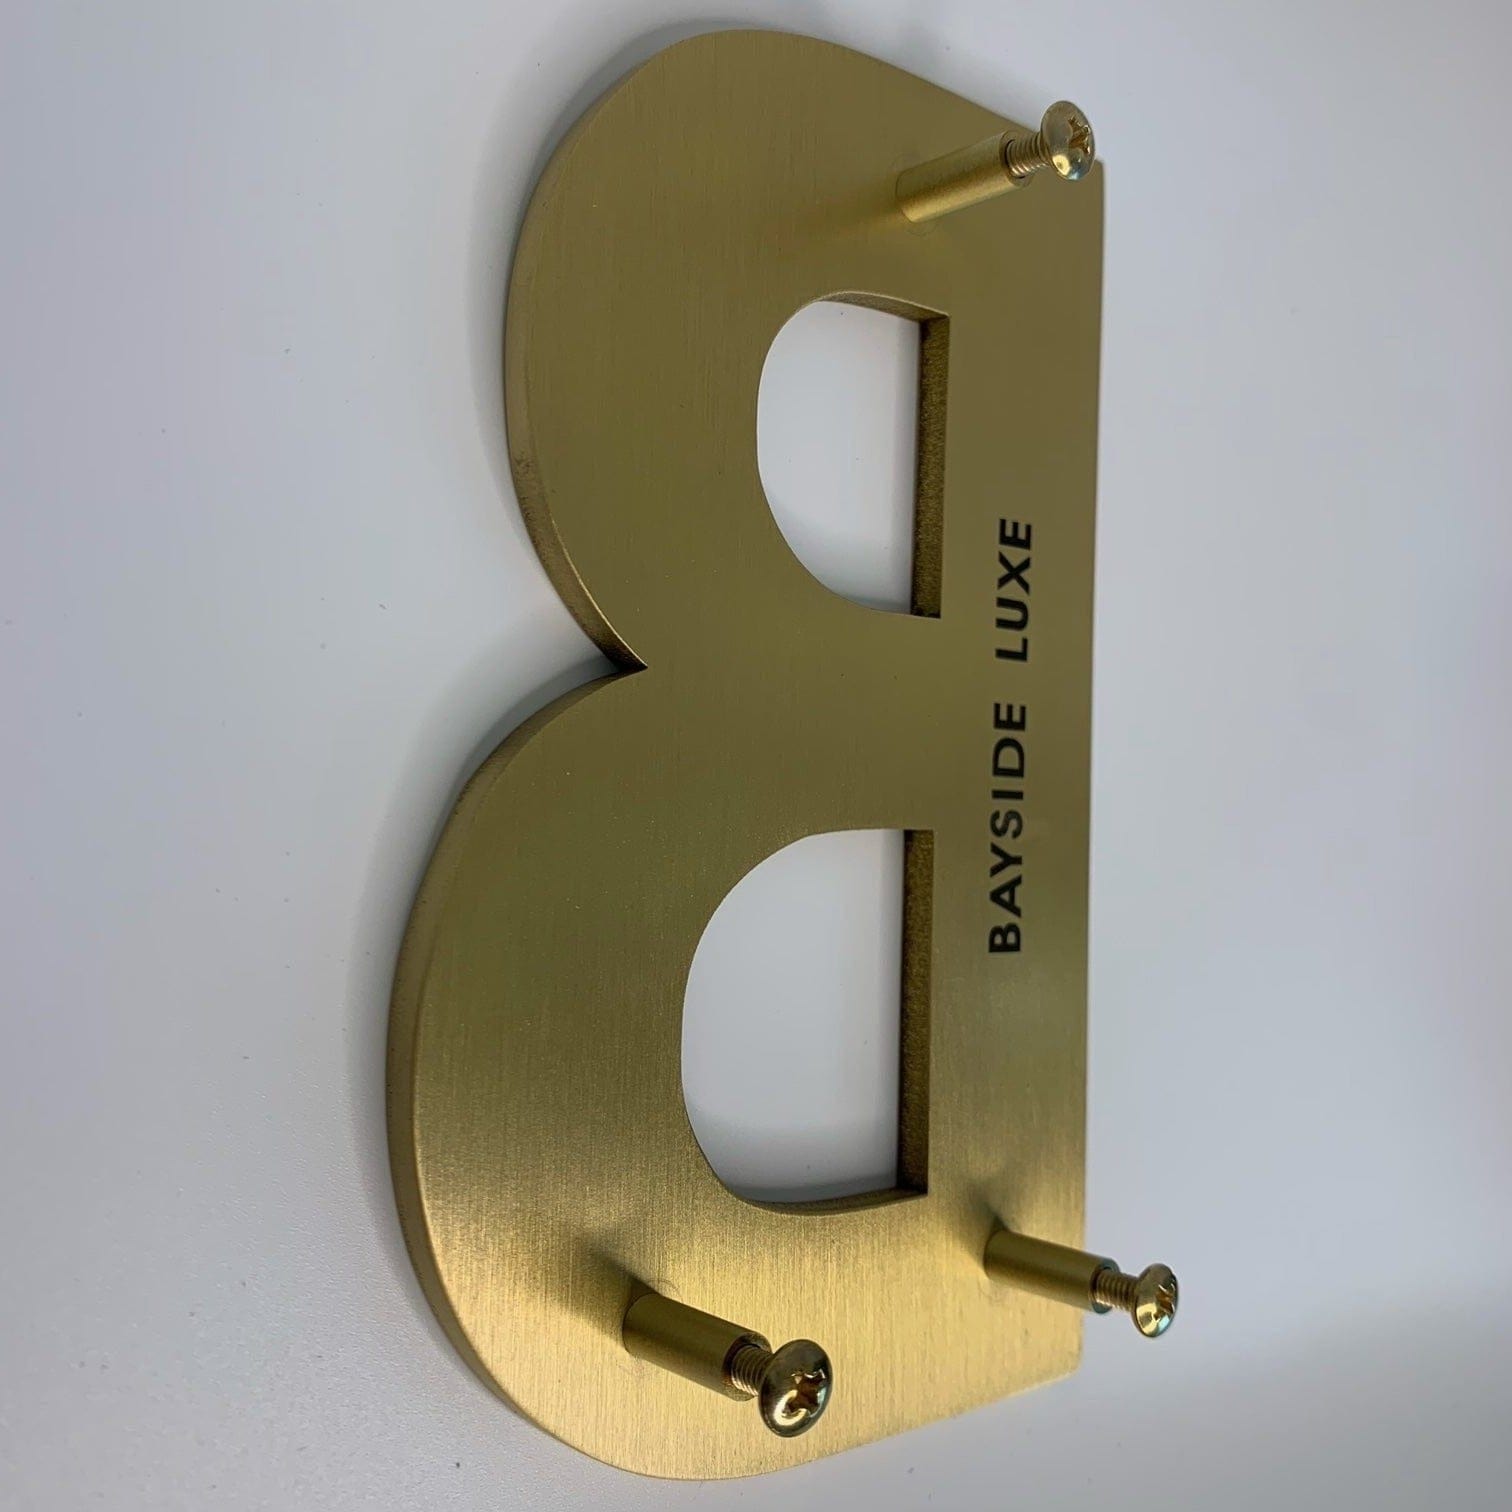 House Numbers and Letters Bayside Luxe Signage - Solid Satin Brass Floating Numbers and Letters - Beaumaris Bay 15cm